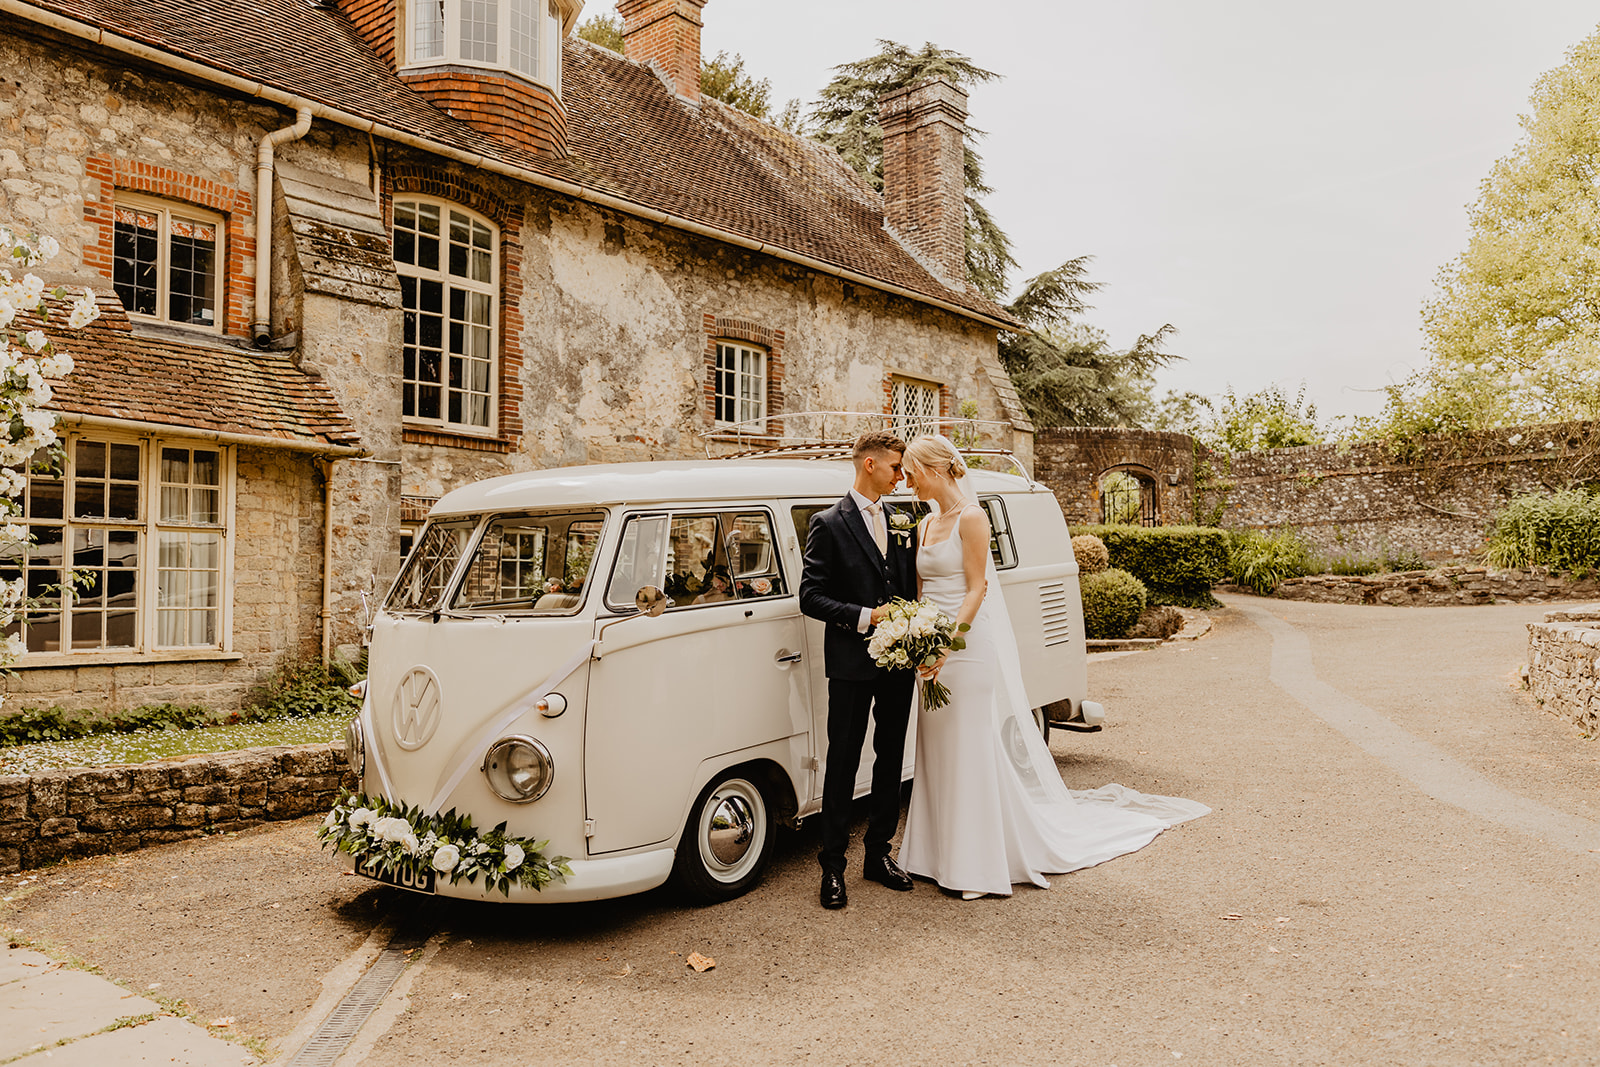 Bride and groom by VW camper at a Bury Manor Barn Wedding in Sussex. Photographer OliveJoy Photography.